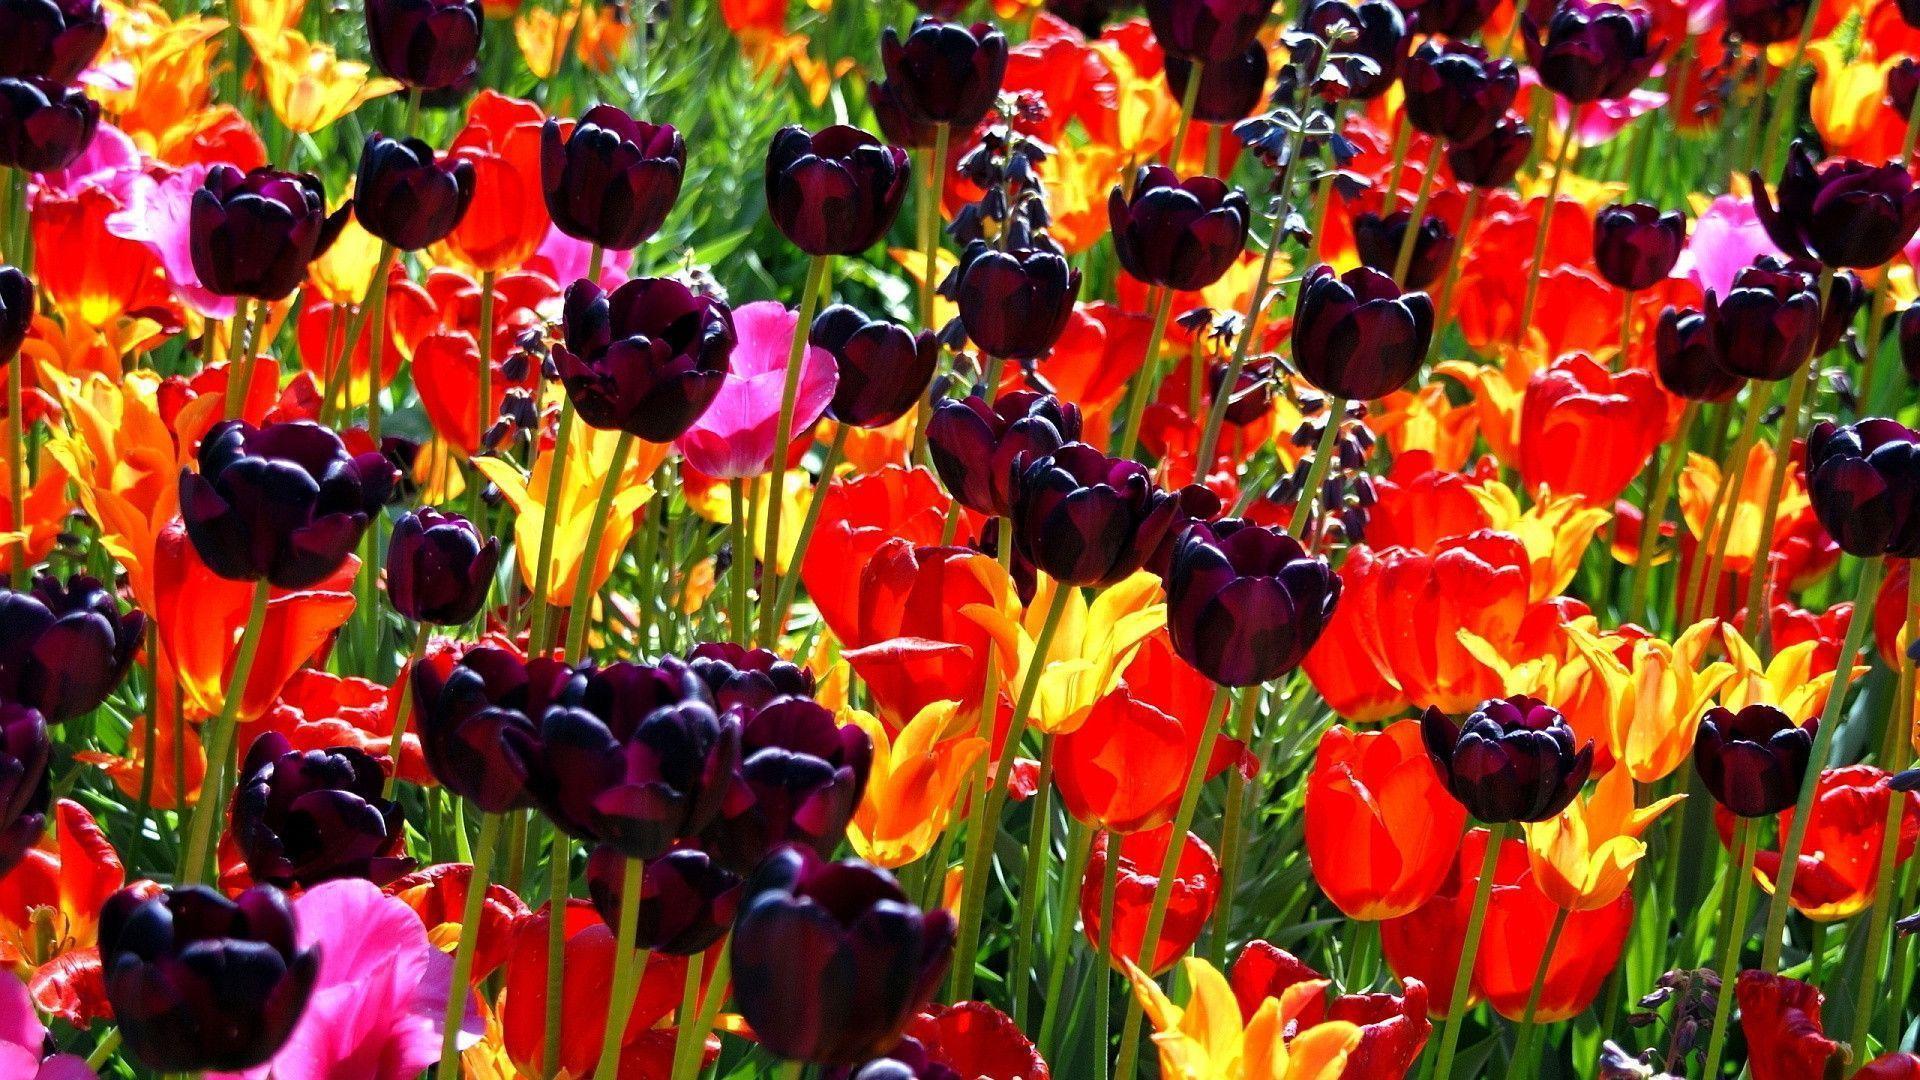 Wallpaper For > Colorful Flowers Wallpaper